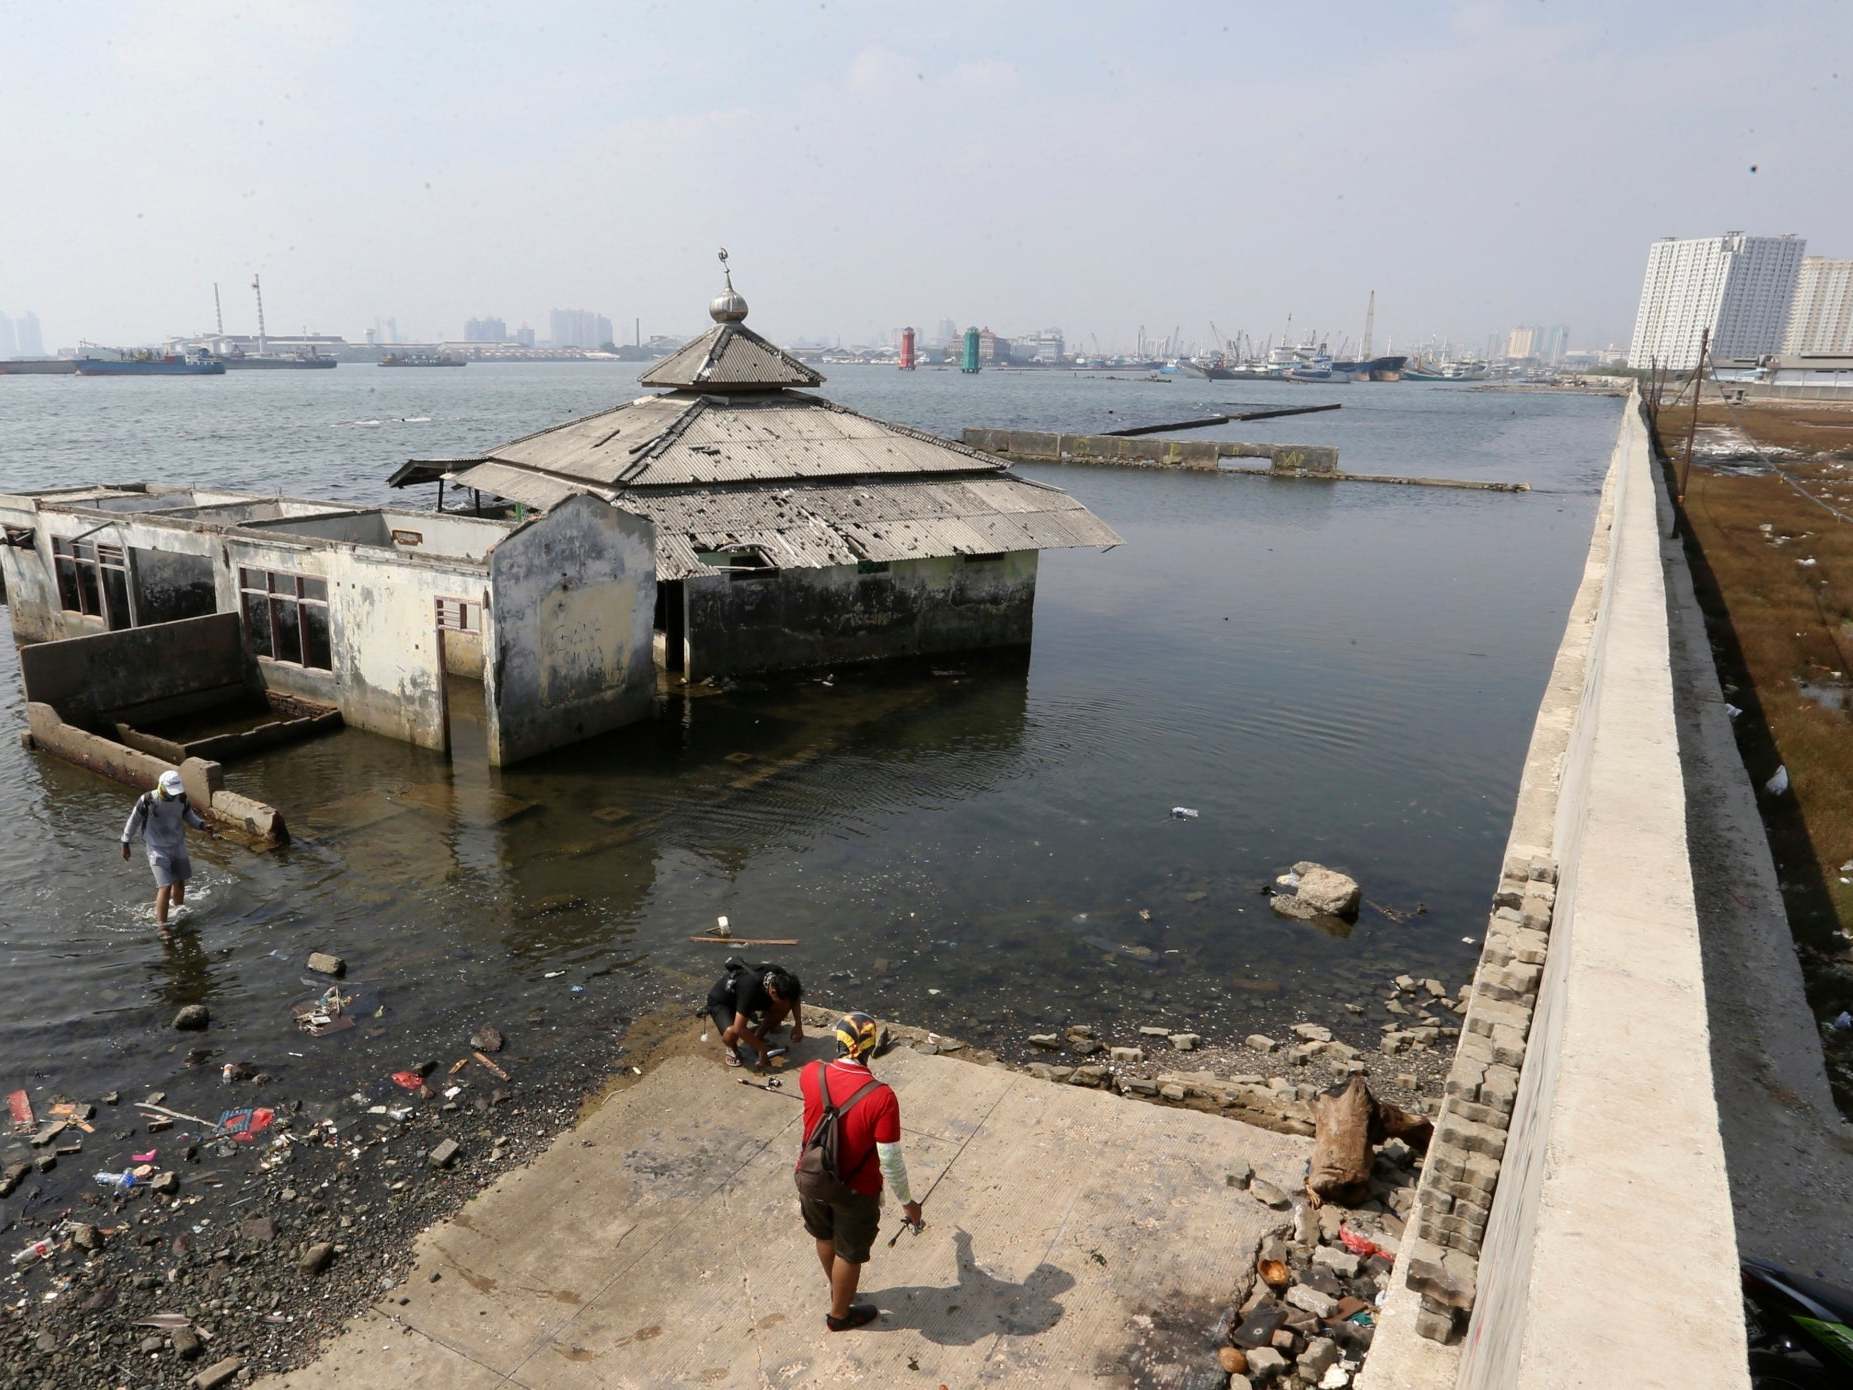 Indonesian president Joko Widodo urged the imminent construction of a giant sea wall to save northern Jakarta from sinking into the ocean